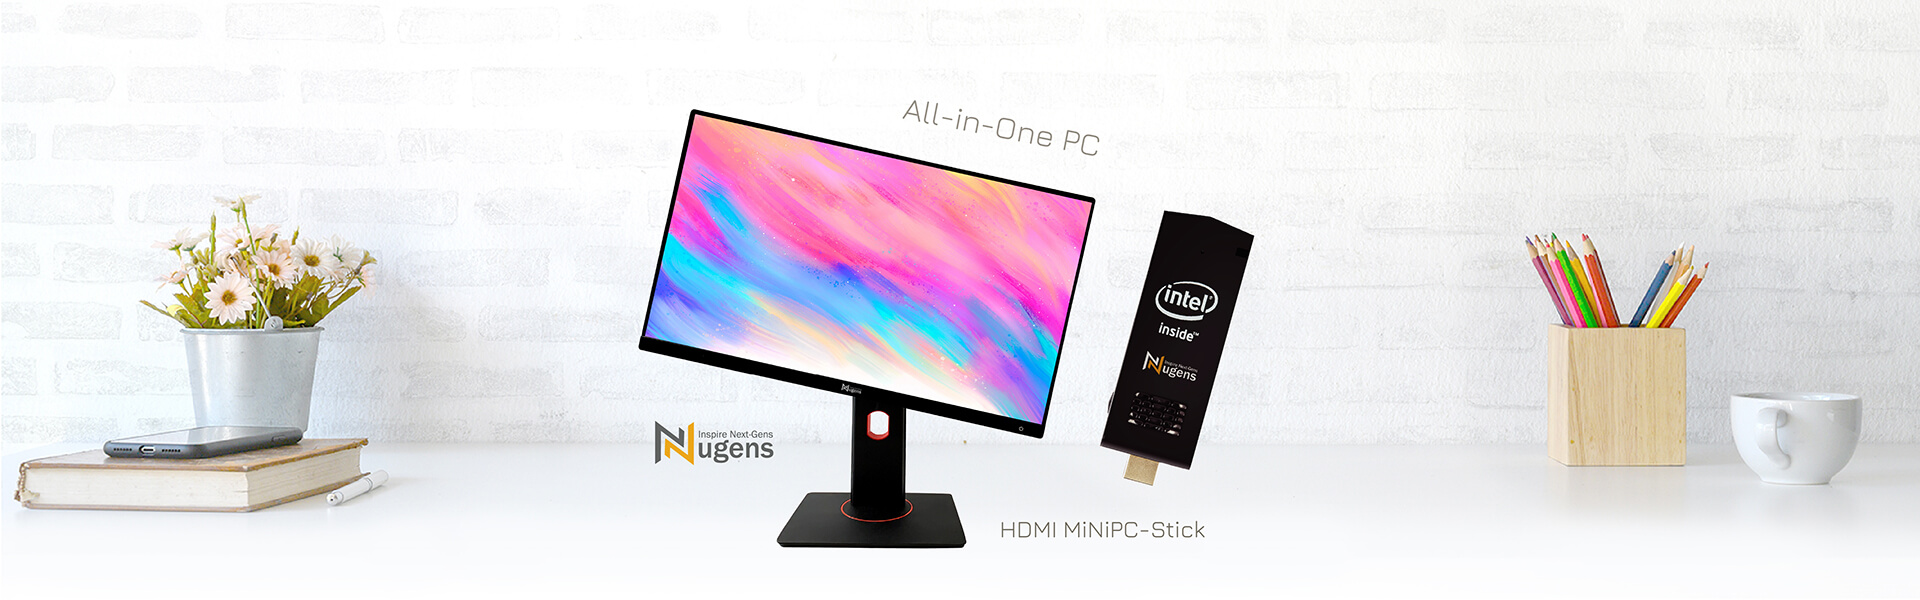 Nugens  Height Adjustable Intel i5 All-in-One PC 